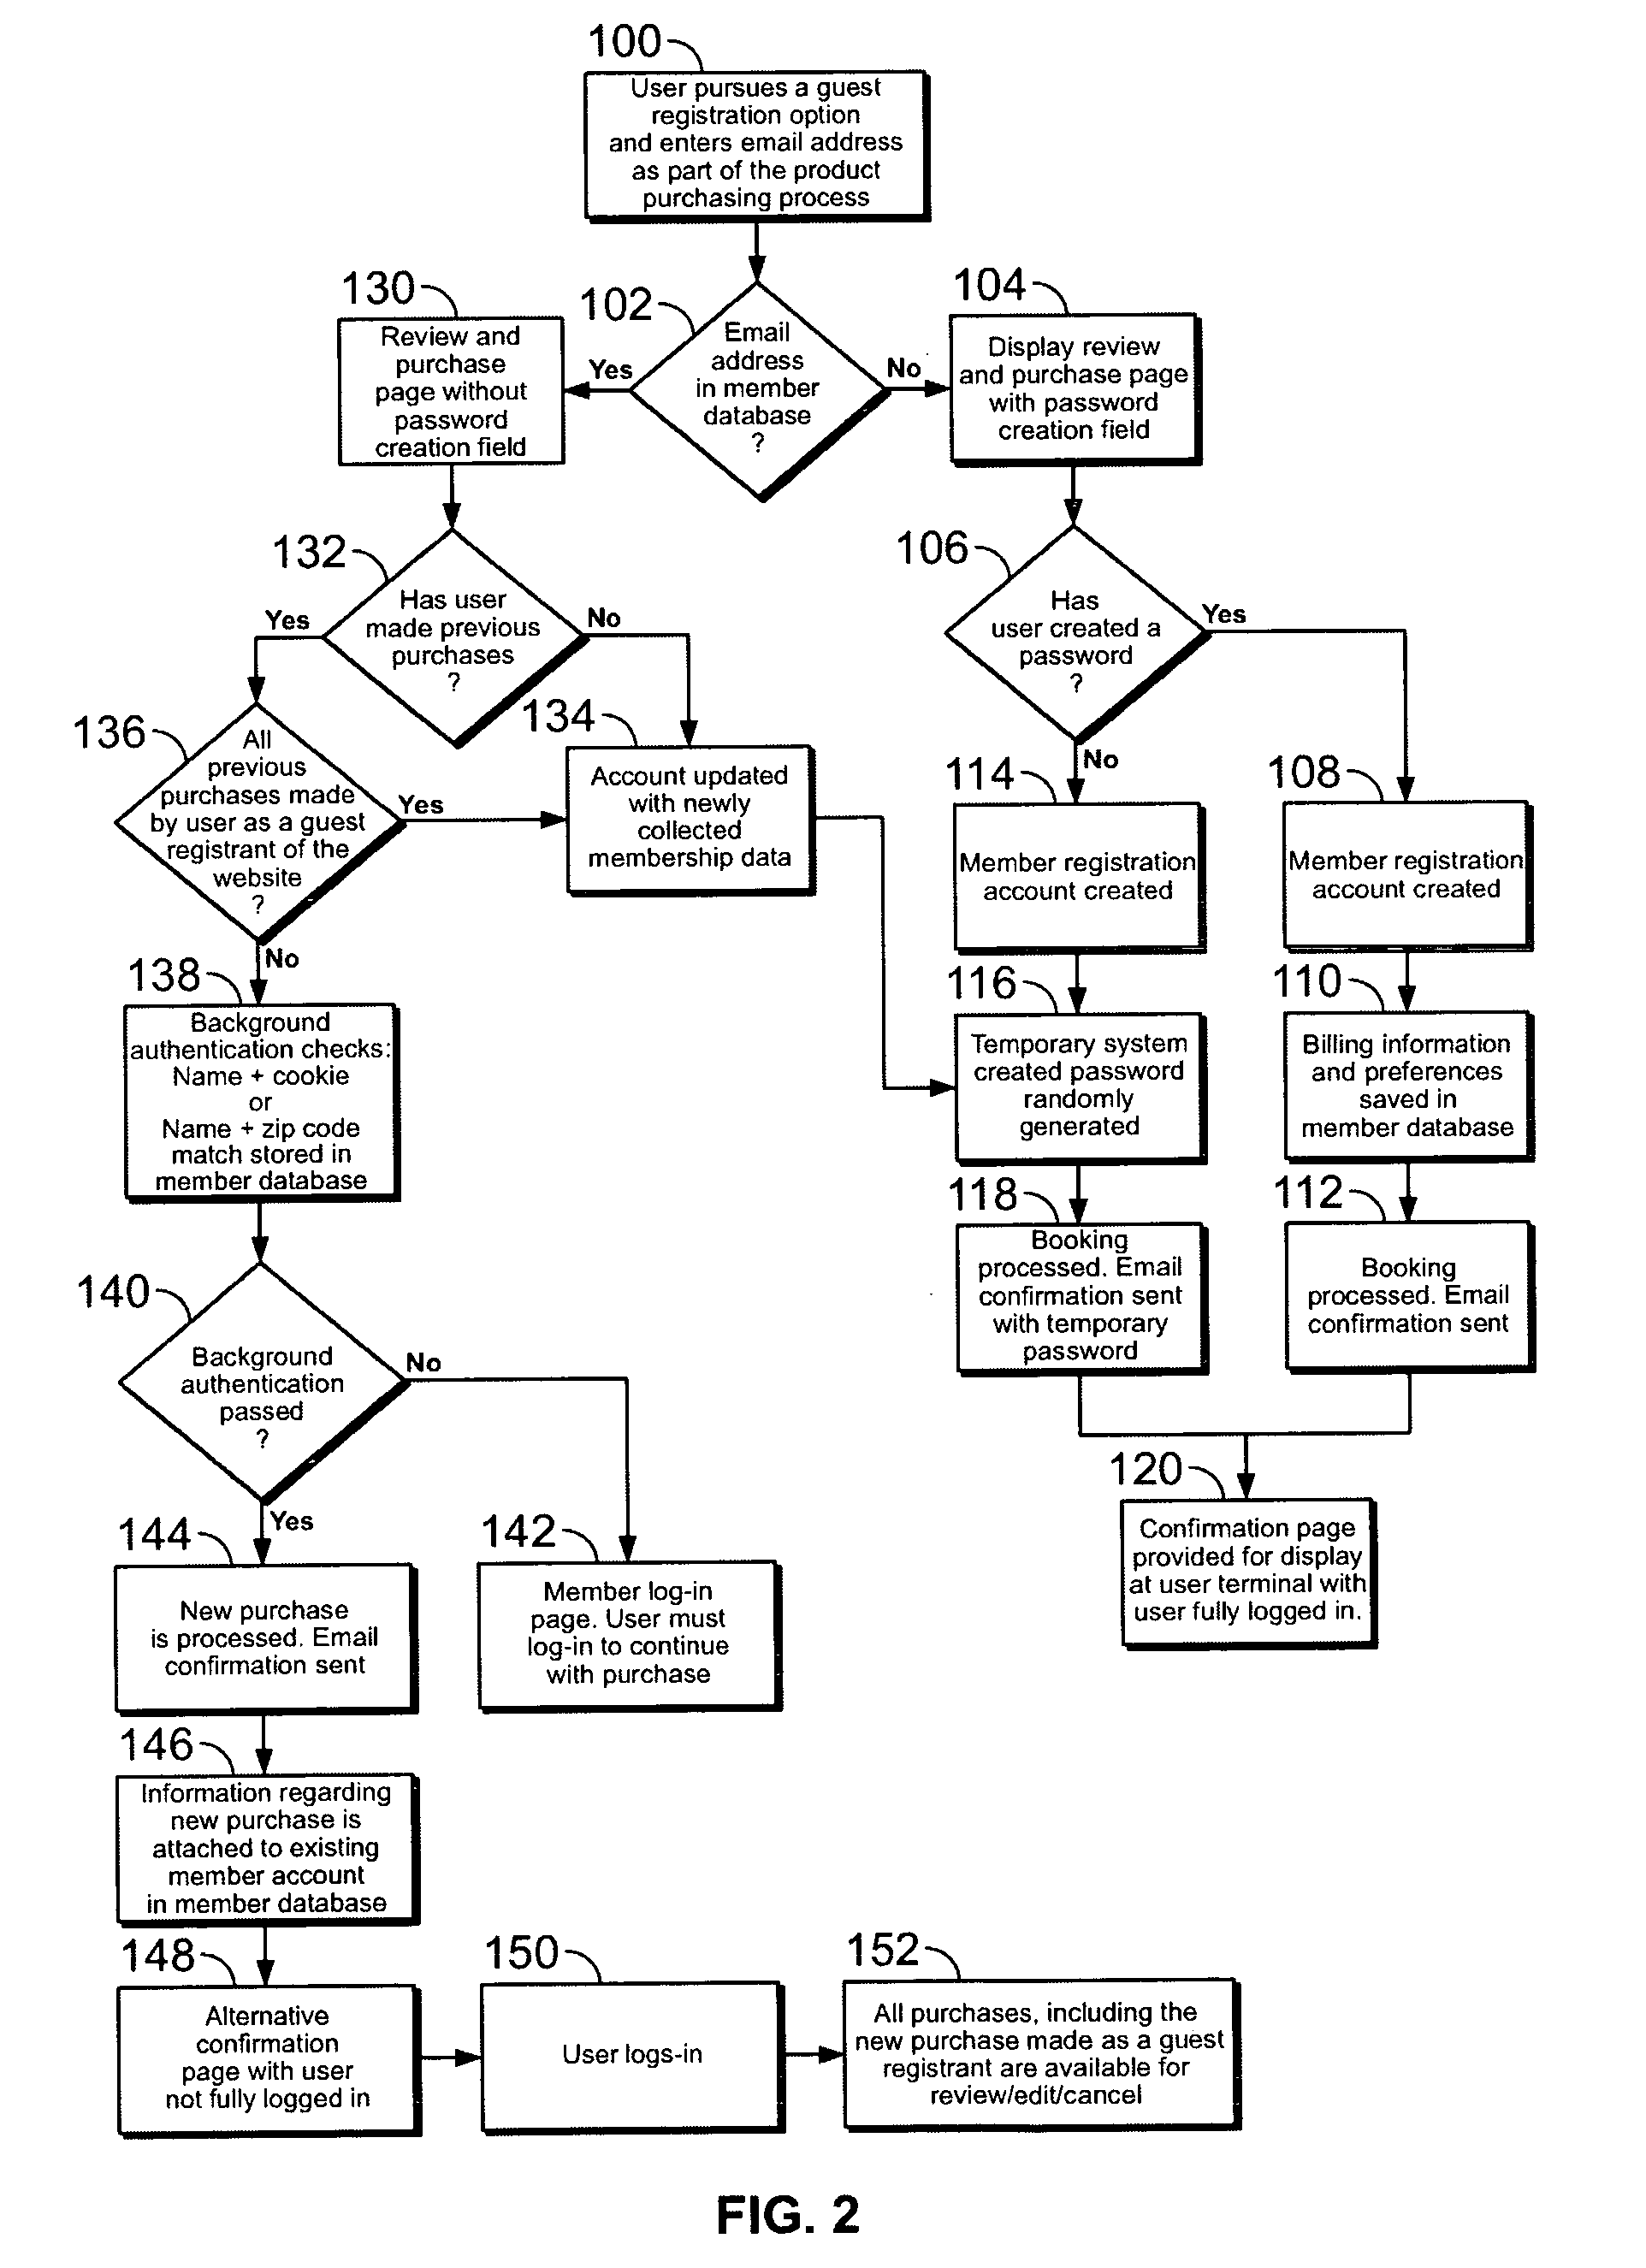 System and method for the on-line purchase of products through a guest registration